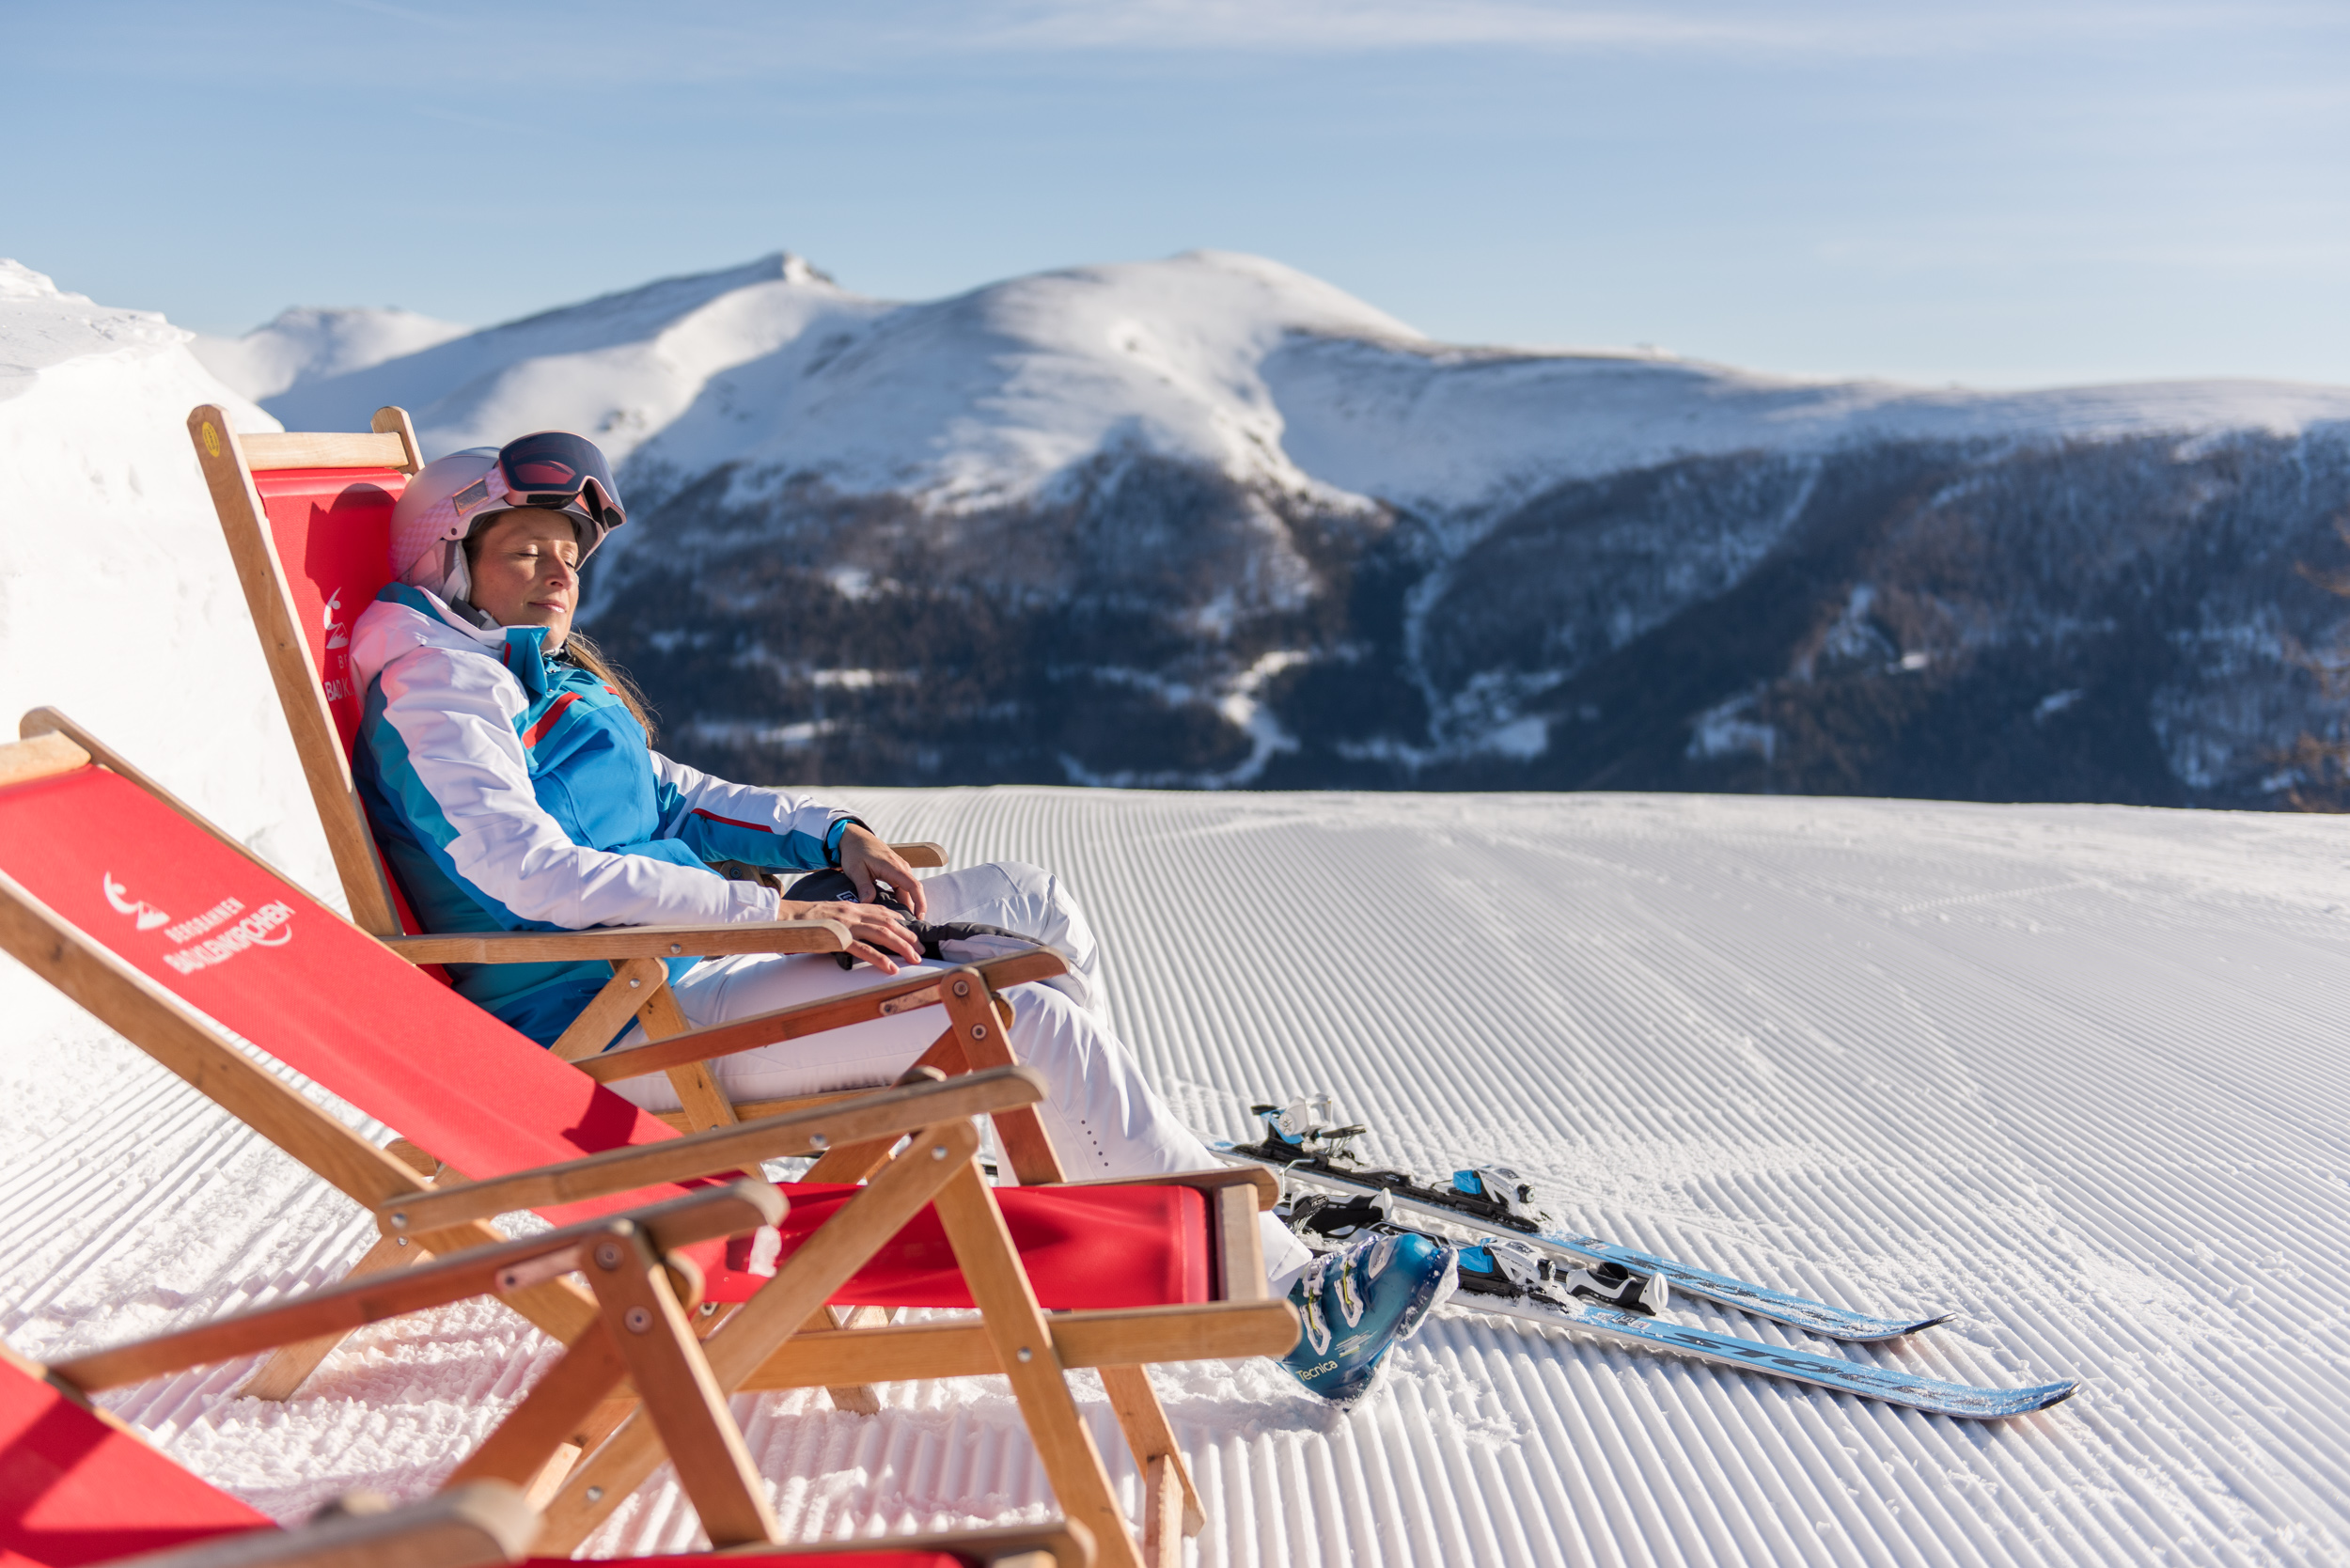 A woman taking a break from skiing and enjoying the sun in a deck chair.